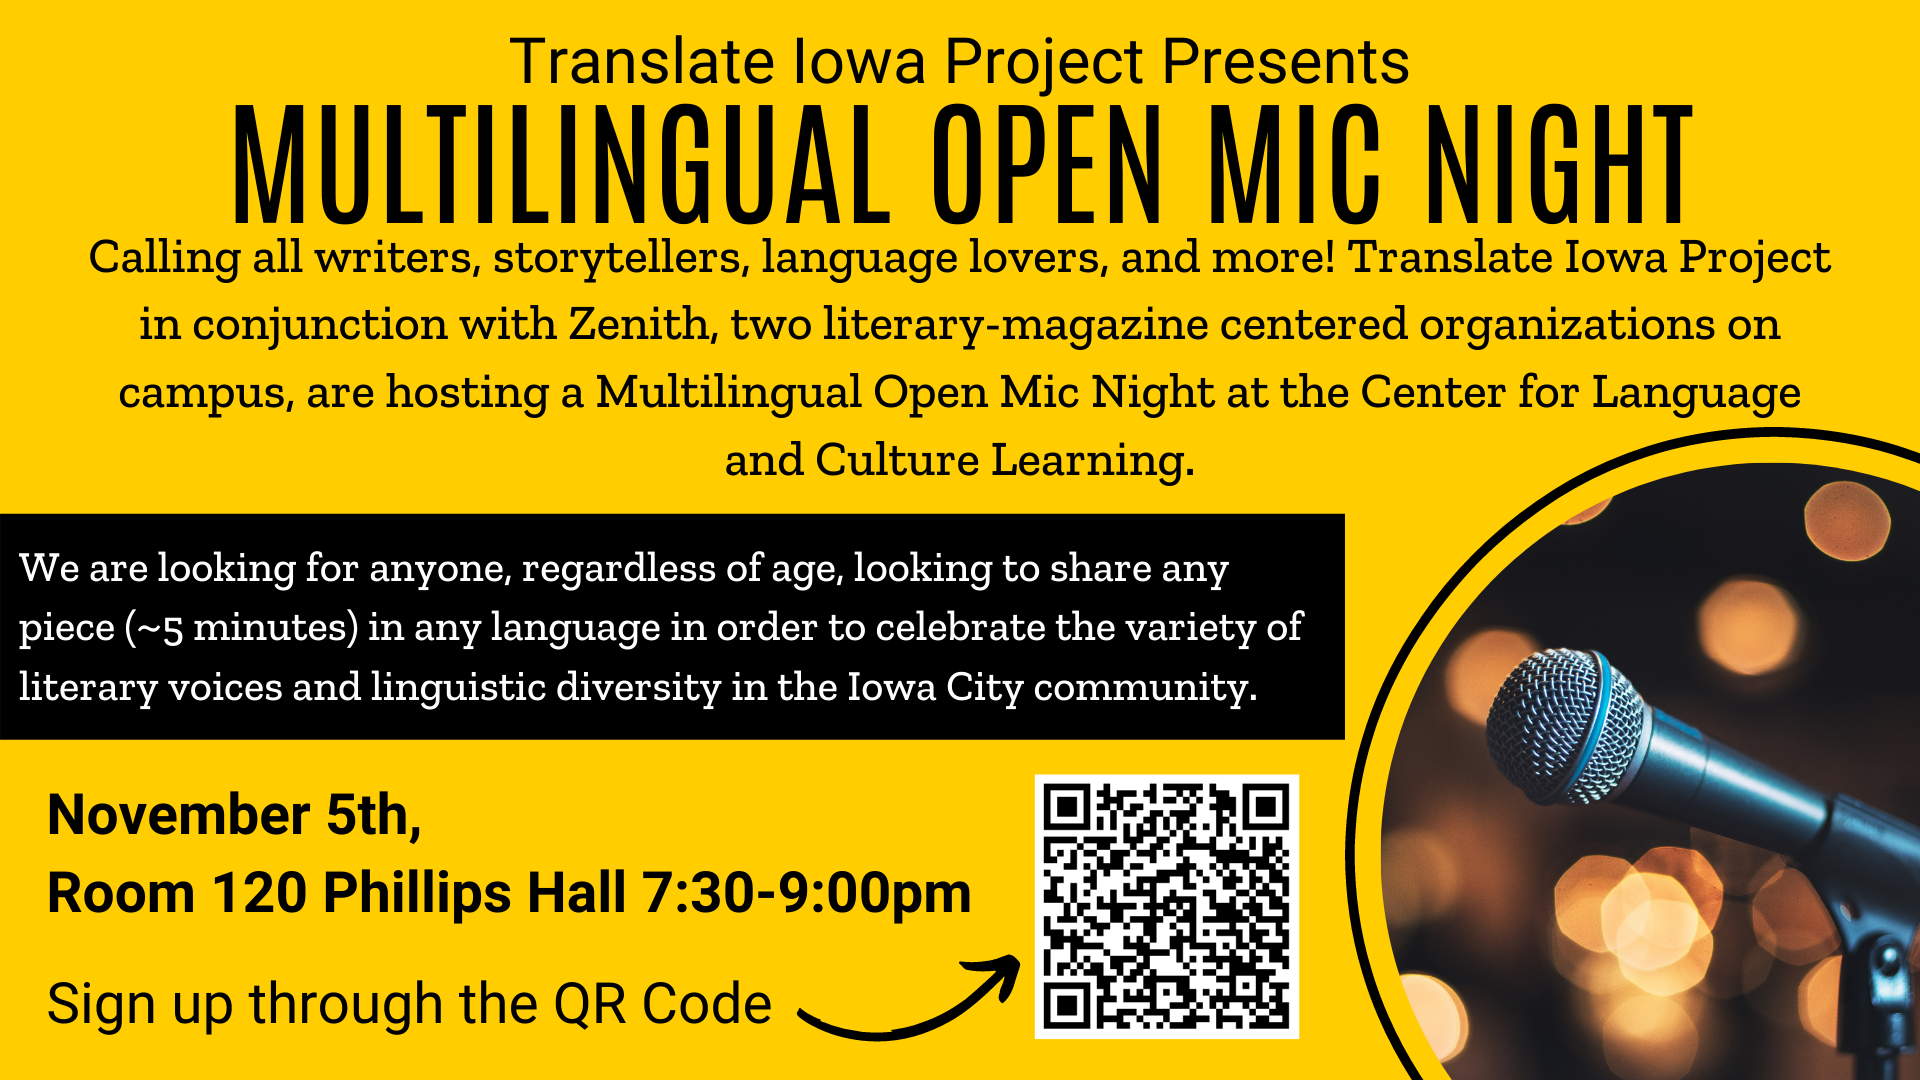 Translate Iowa Project Presents MULTILINGUAL OPEN MIC NIGHT. Calling all writers, storytellers, language lovers, and more! Translate Iowa Project in conjunction with Zenith, two literary-magazine centered organizations on campus, are hosting a Multilingual Open Mic Night at the Center for Language and Culture Learning. We are looking for anyone, regardless of age, looking to share any piece (~5 minutes) in any language in order to celebrate the variety of literary voices and linguistic diversity in the Iowa City community. November 5th,  Room 120 Phillips Hall 7:30-9:00pm. Sign up at https://docs.google.com/document/u/0/d/1mSqDLEDu5WvpRA7_naGXea_3hqCcdY9KBuMLRcwXGWw/mobilebasic